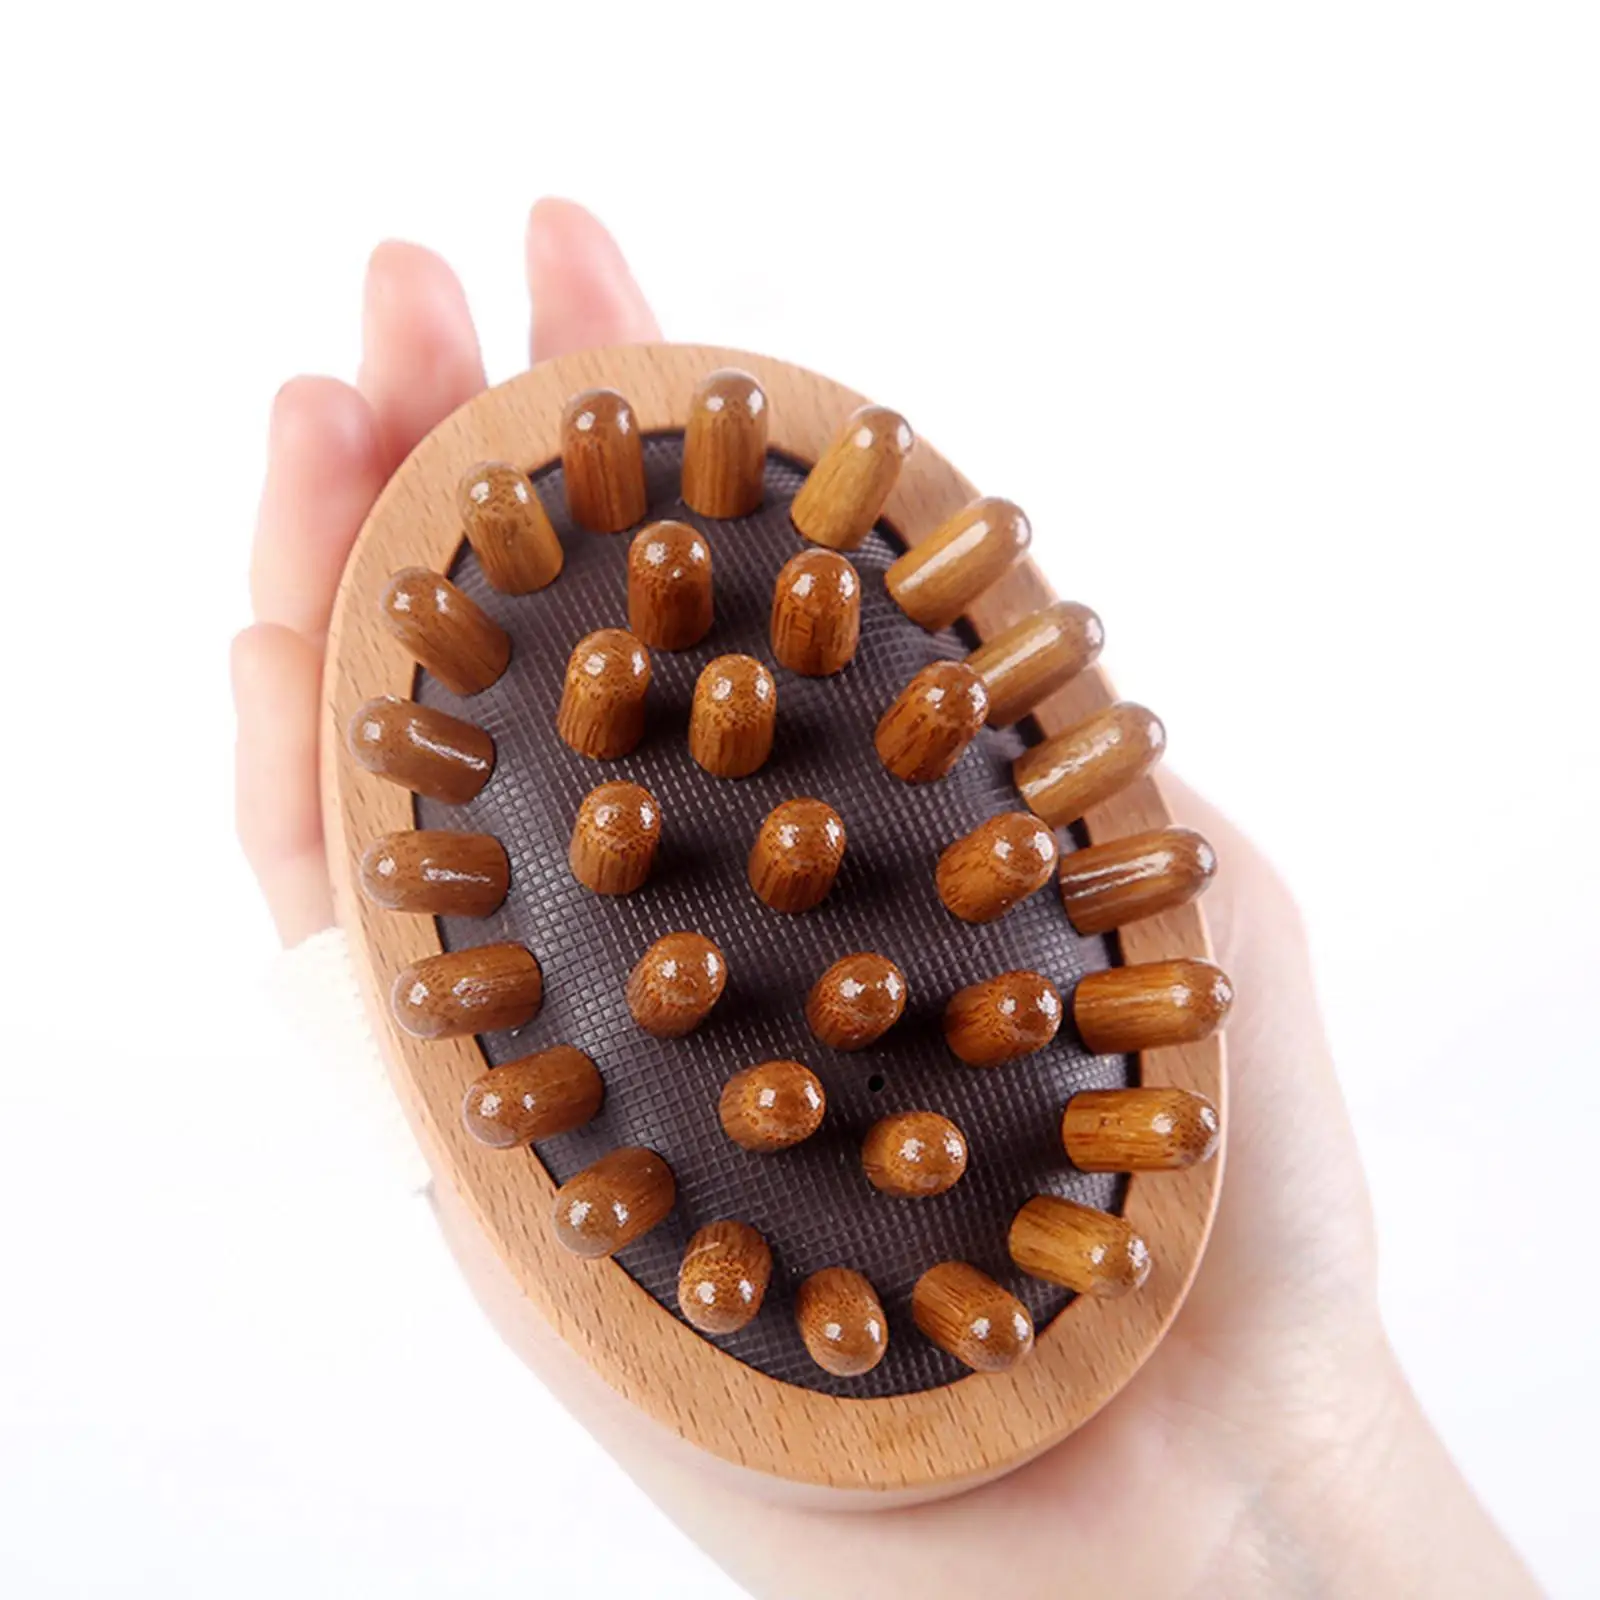 Wooden Massage Body Brush Handheld Muscle Relaxation Multi Functional Body Massager Brush Tool for Shoulder Neck Legs Back Thigh